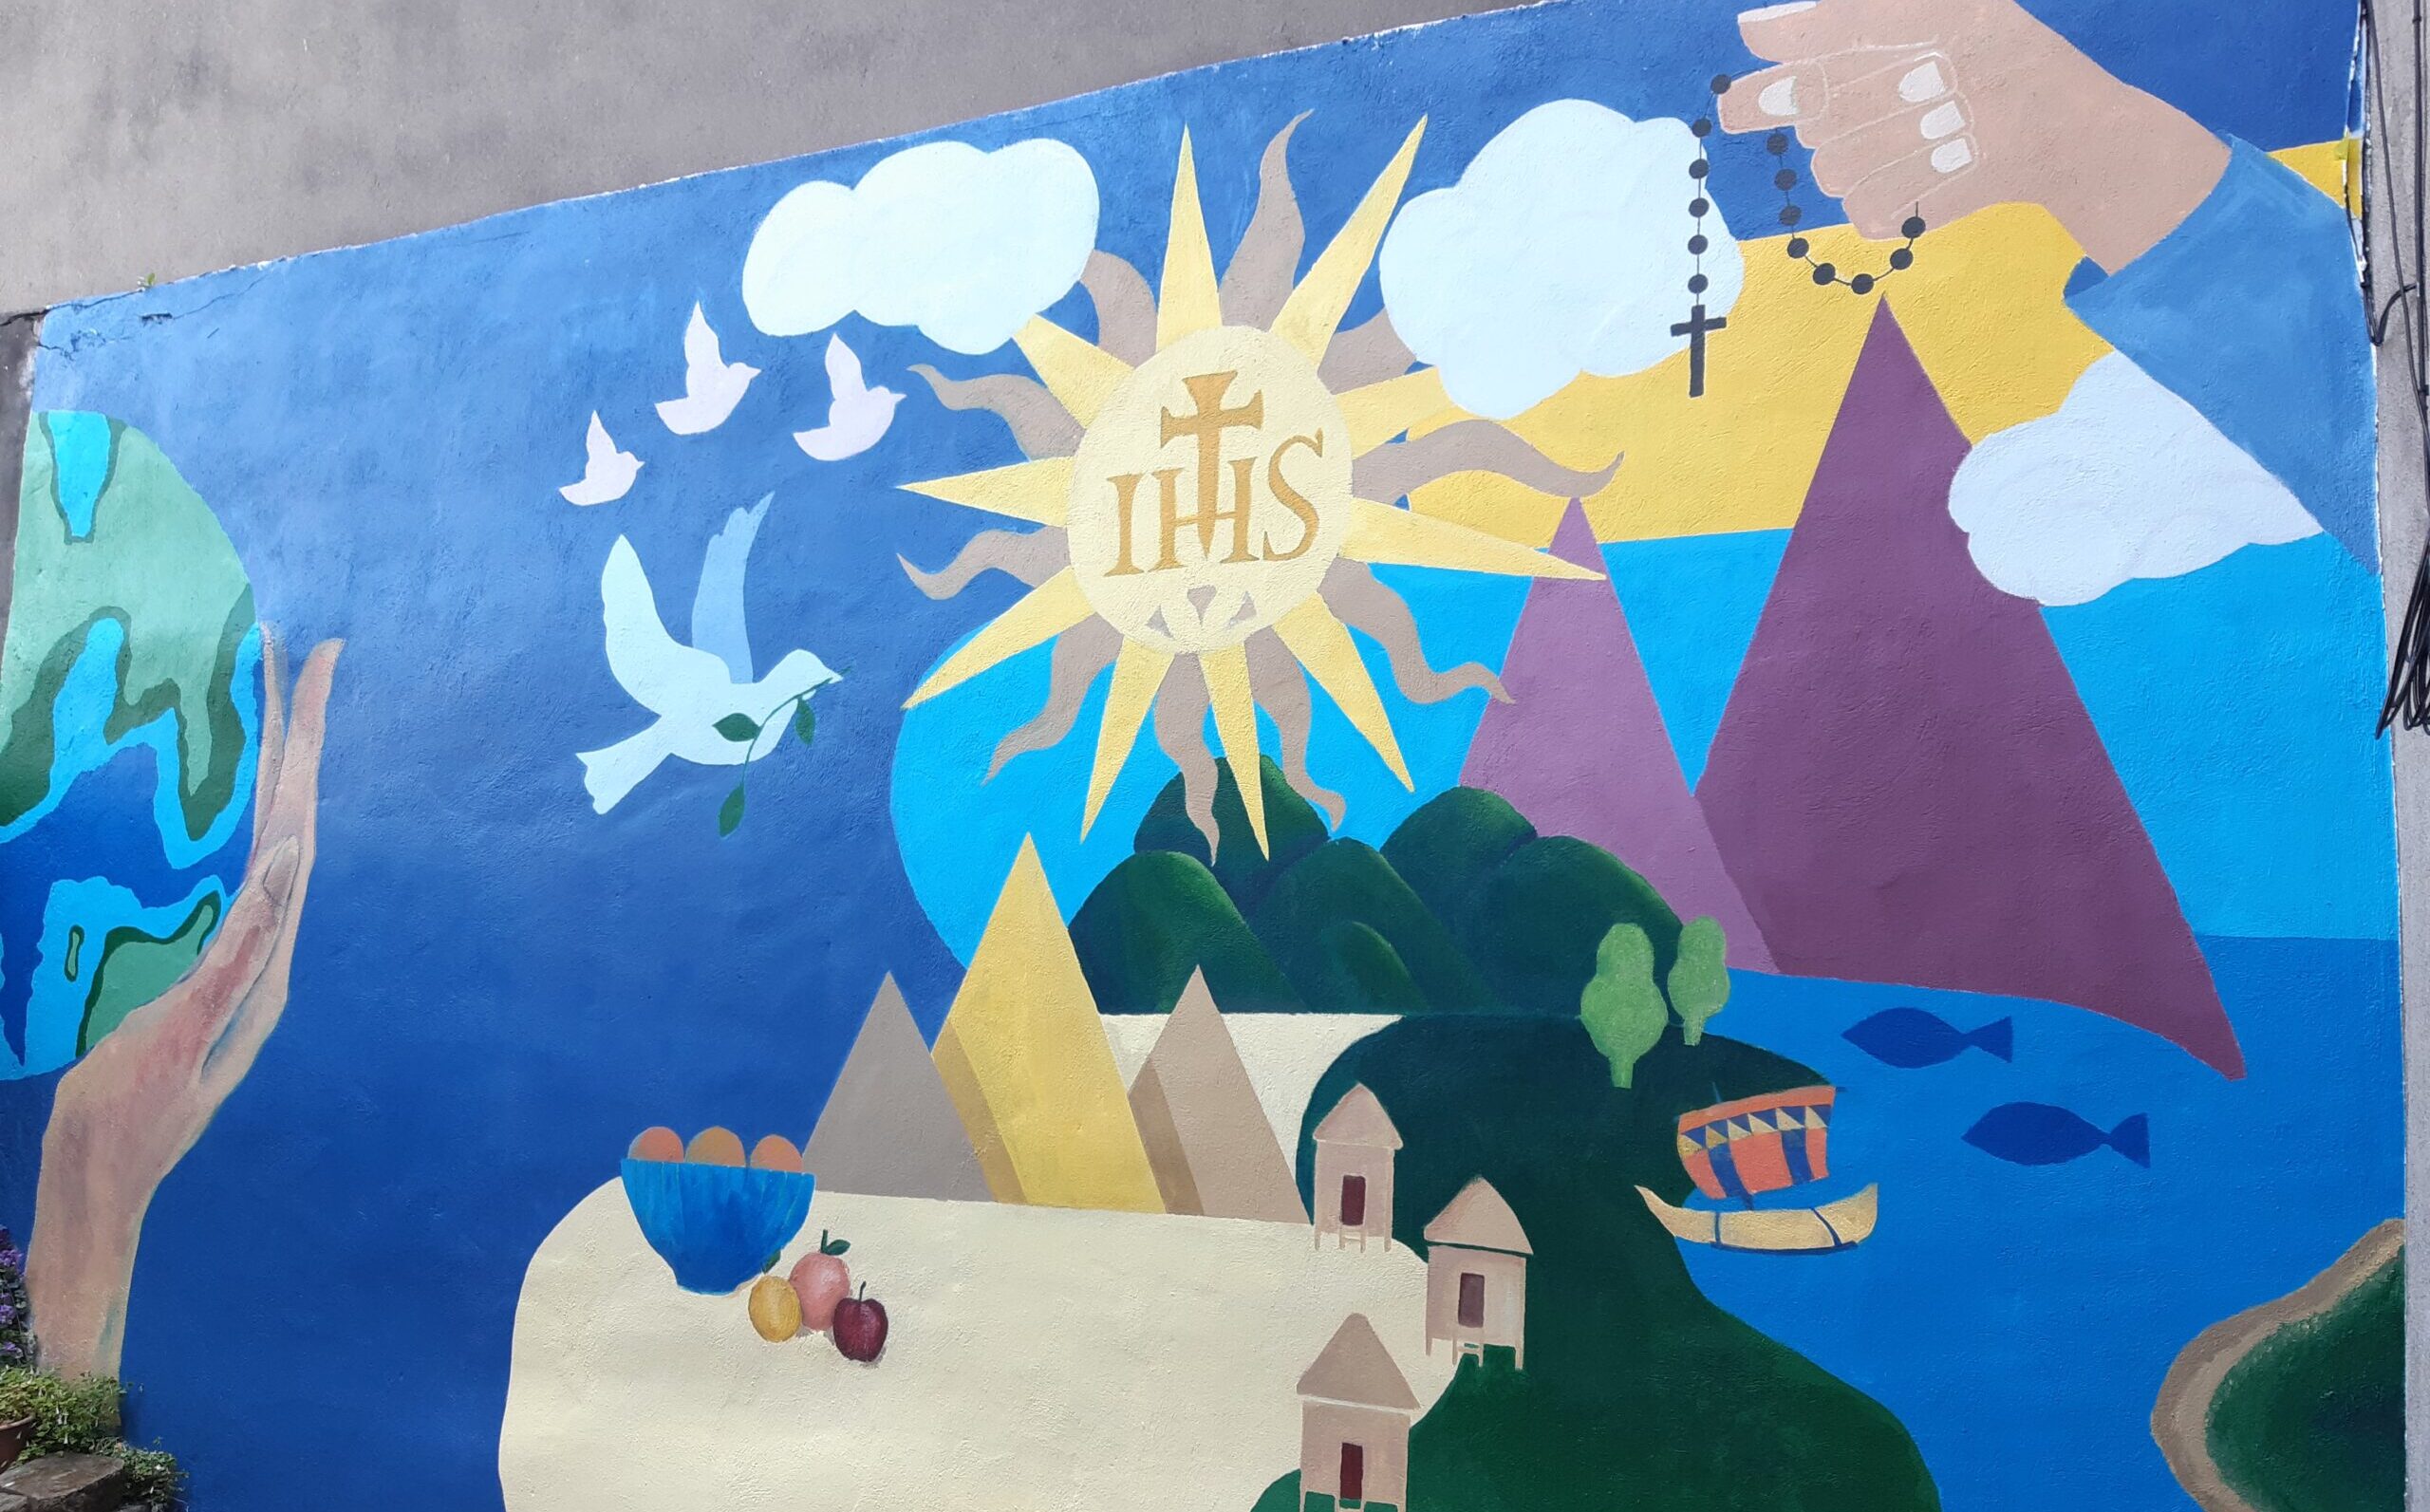 completed mural. it depicts hills and mountains. hands cradling planet earth. Hill and mountains, a blue sky and the ocean. the dove of peace is above the landscape scene.